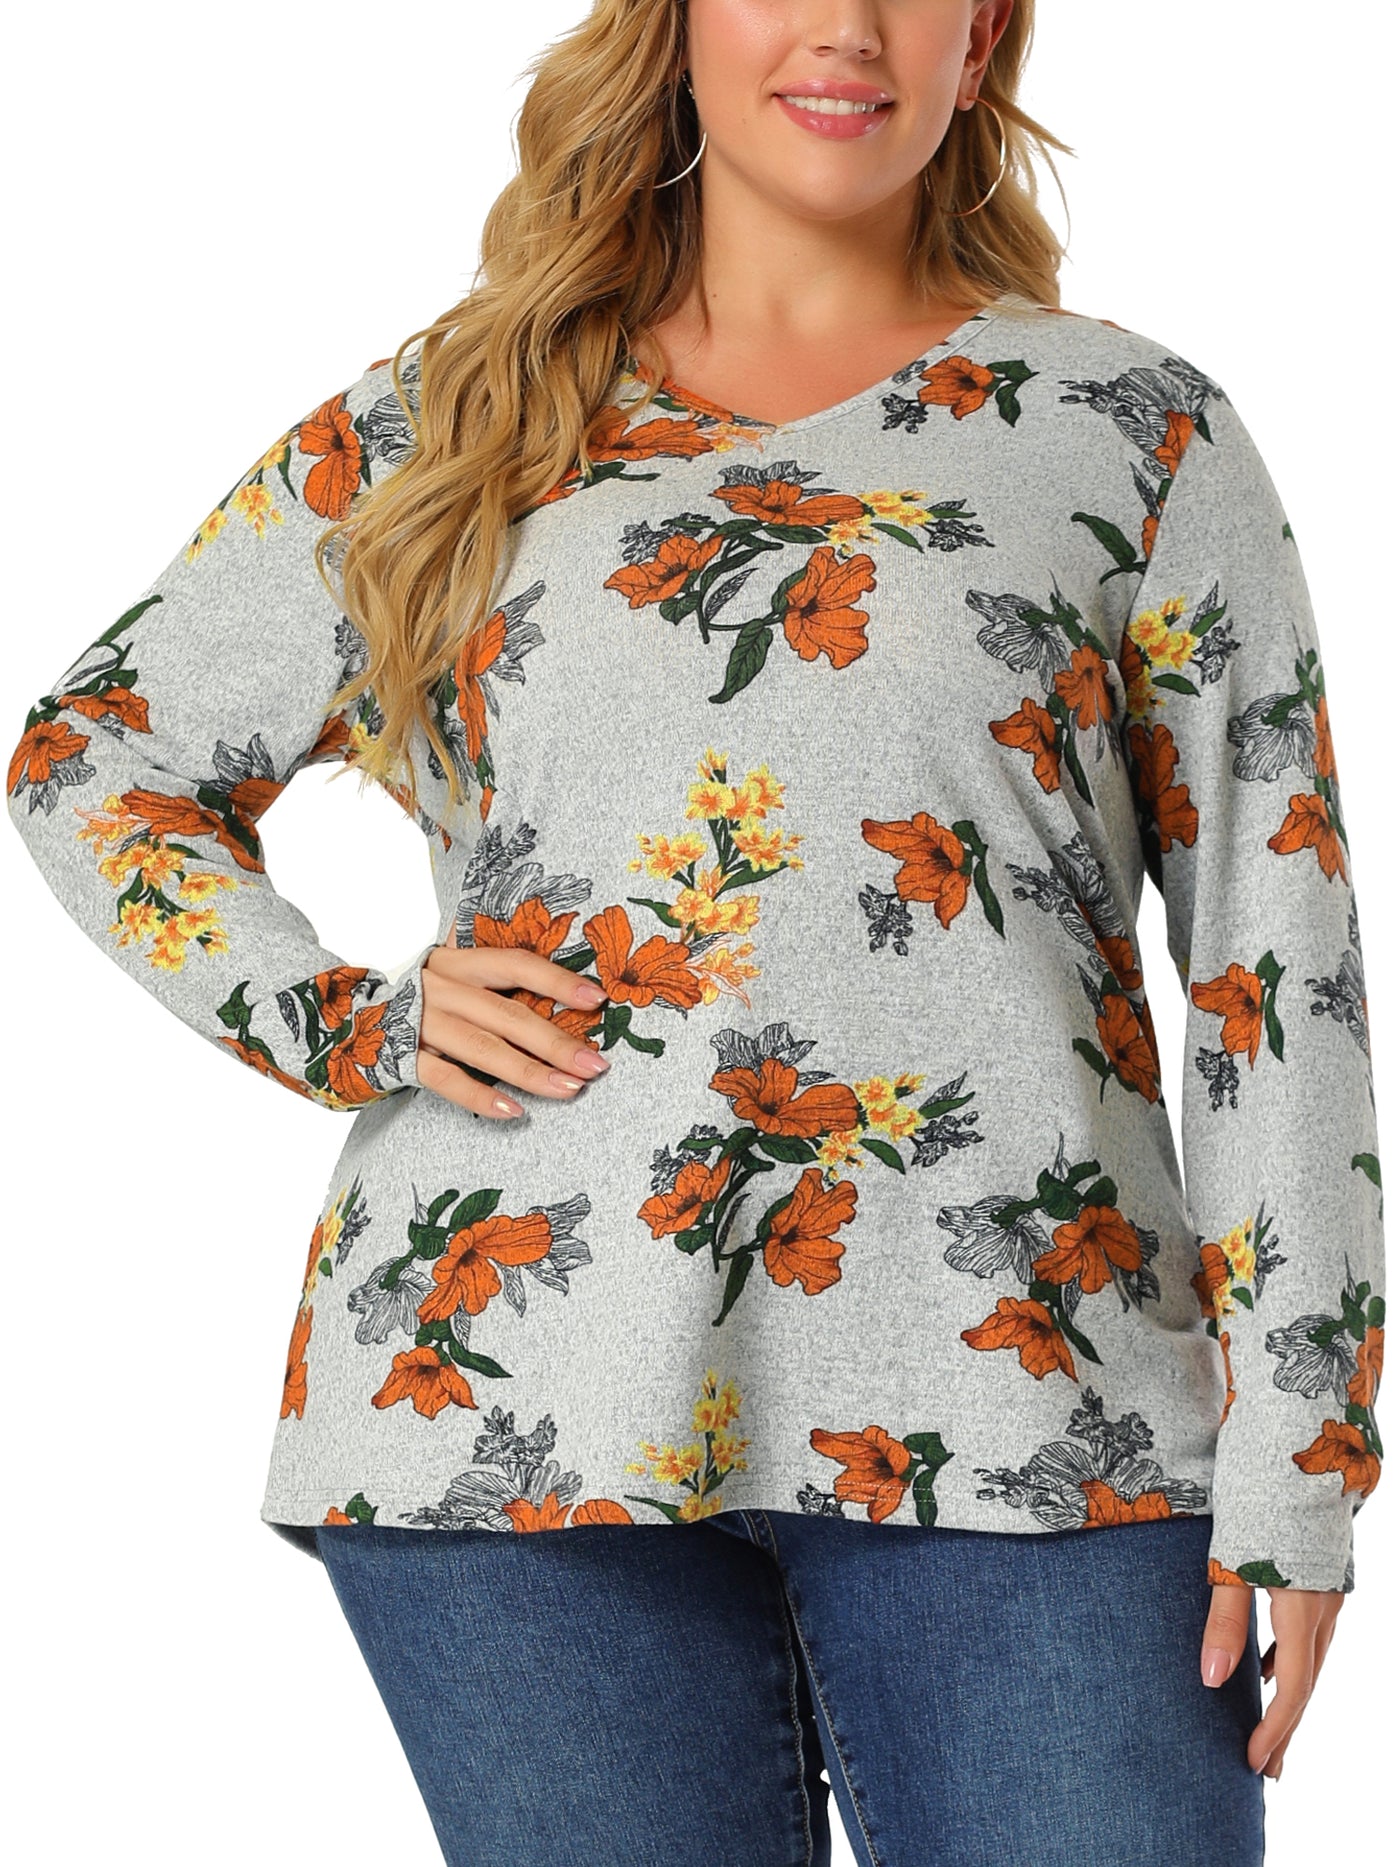 Bublédon Knit Relax Fit Floral Printed V Neck Long Sleeve Shirt